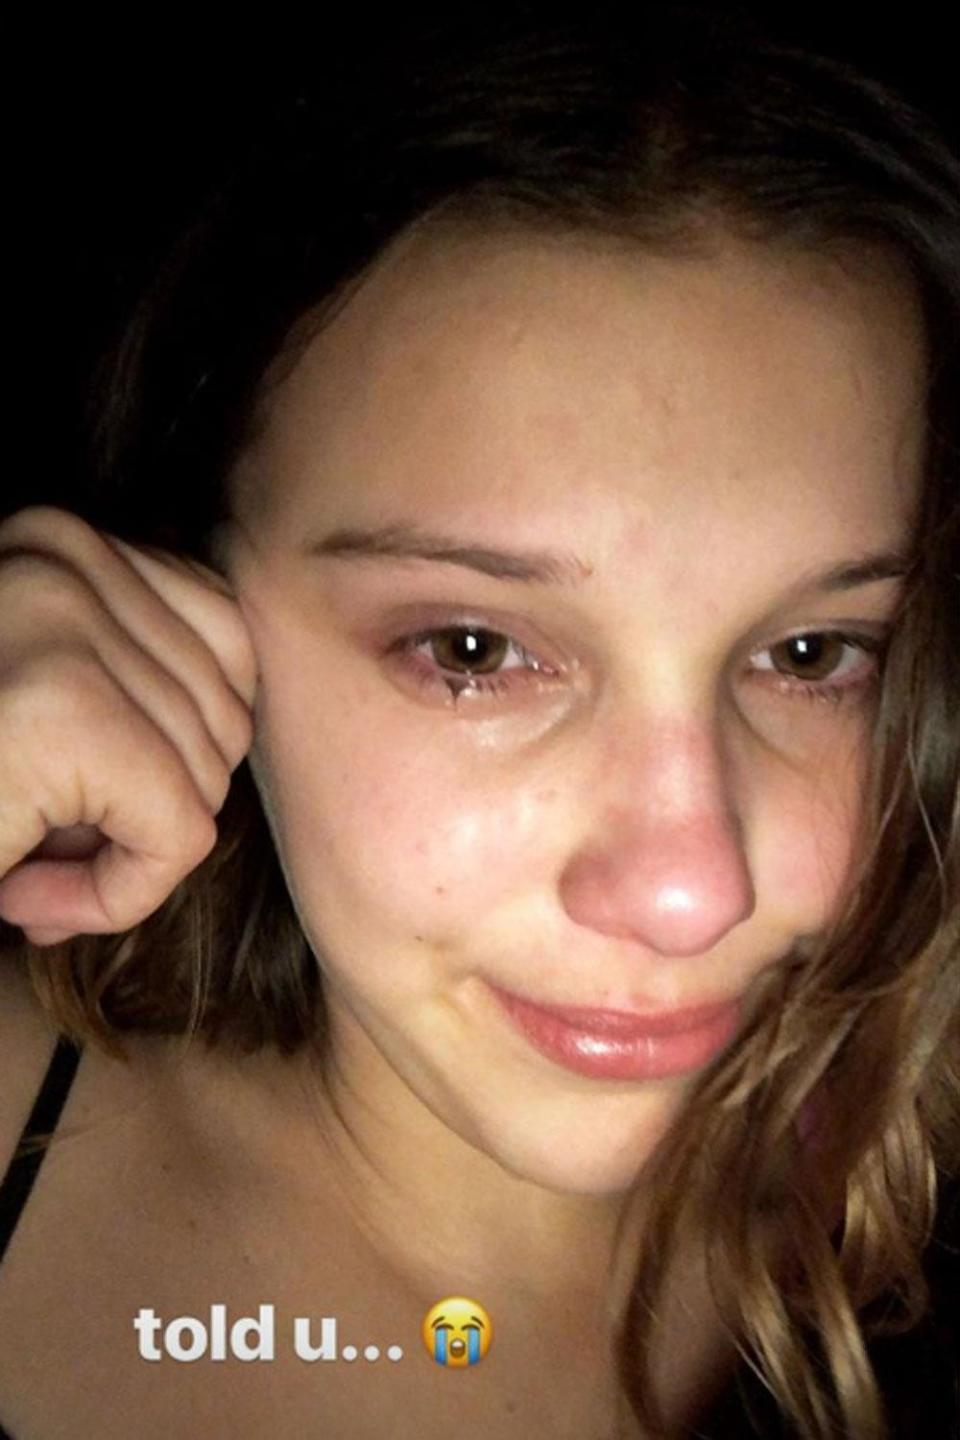 In tears: Millie Bobby Brown got emotional after finishing filming (Instagram / Millie Bobby Brown)